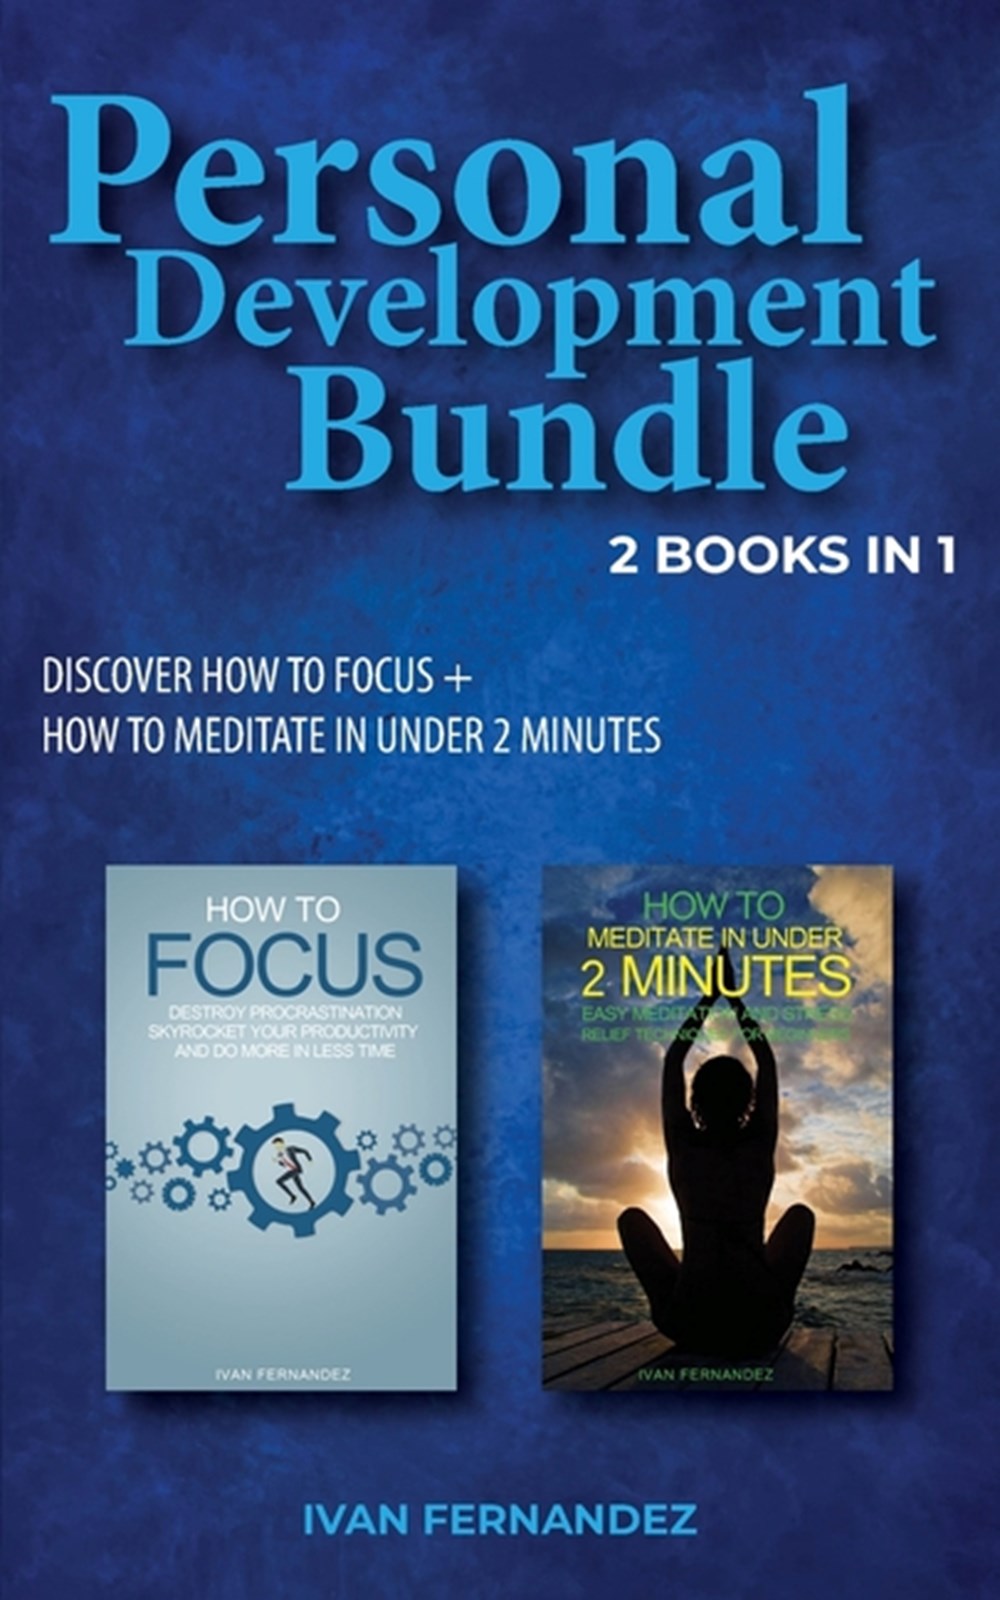 Personal Development Bundle 2 Books in 1: Discover How to Focus + How to Meditate in Under 2 Minutes